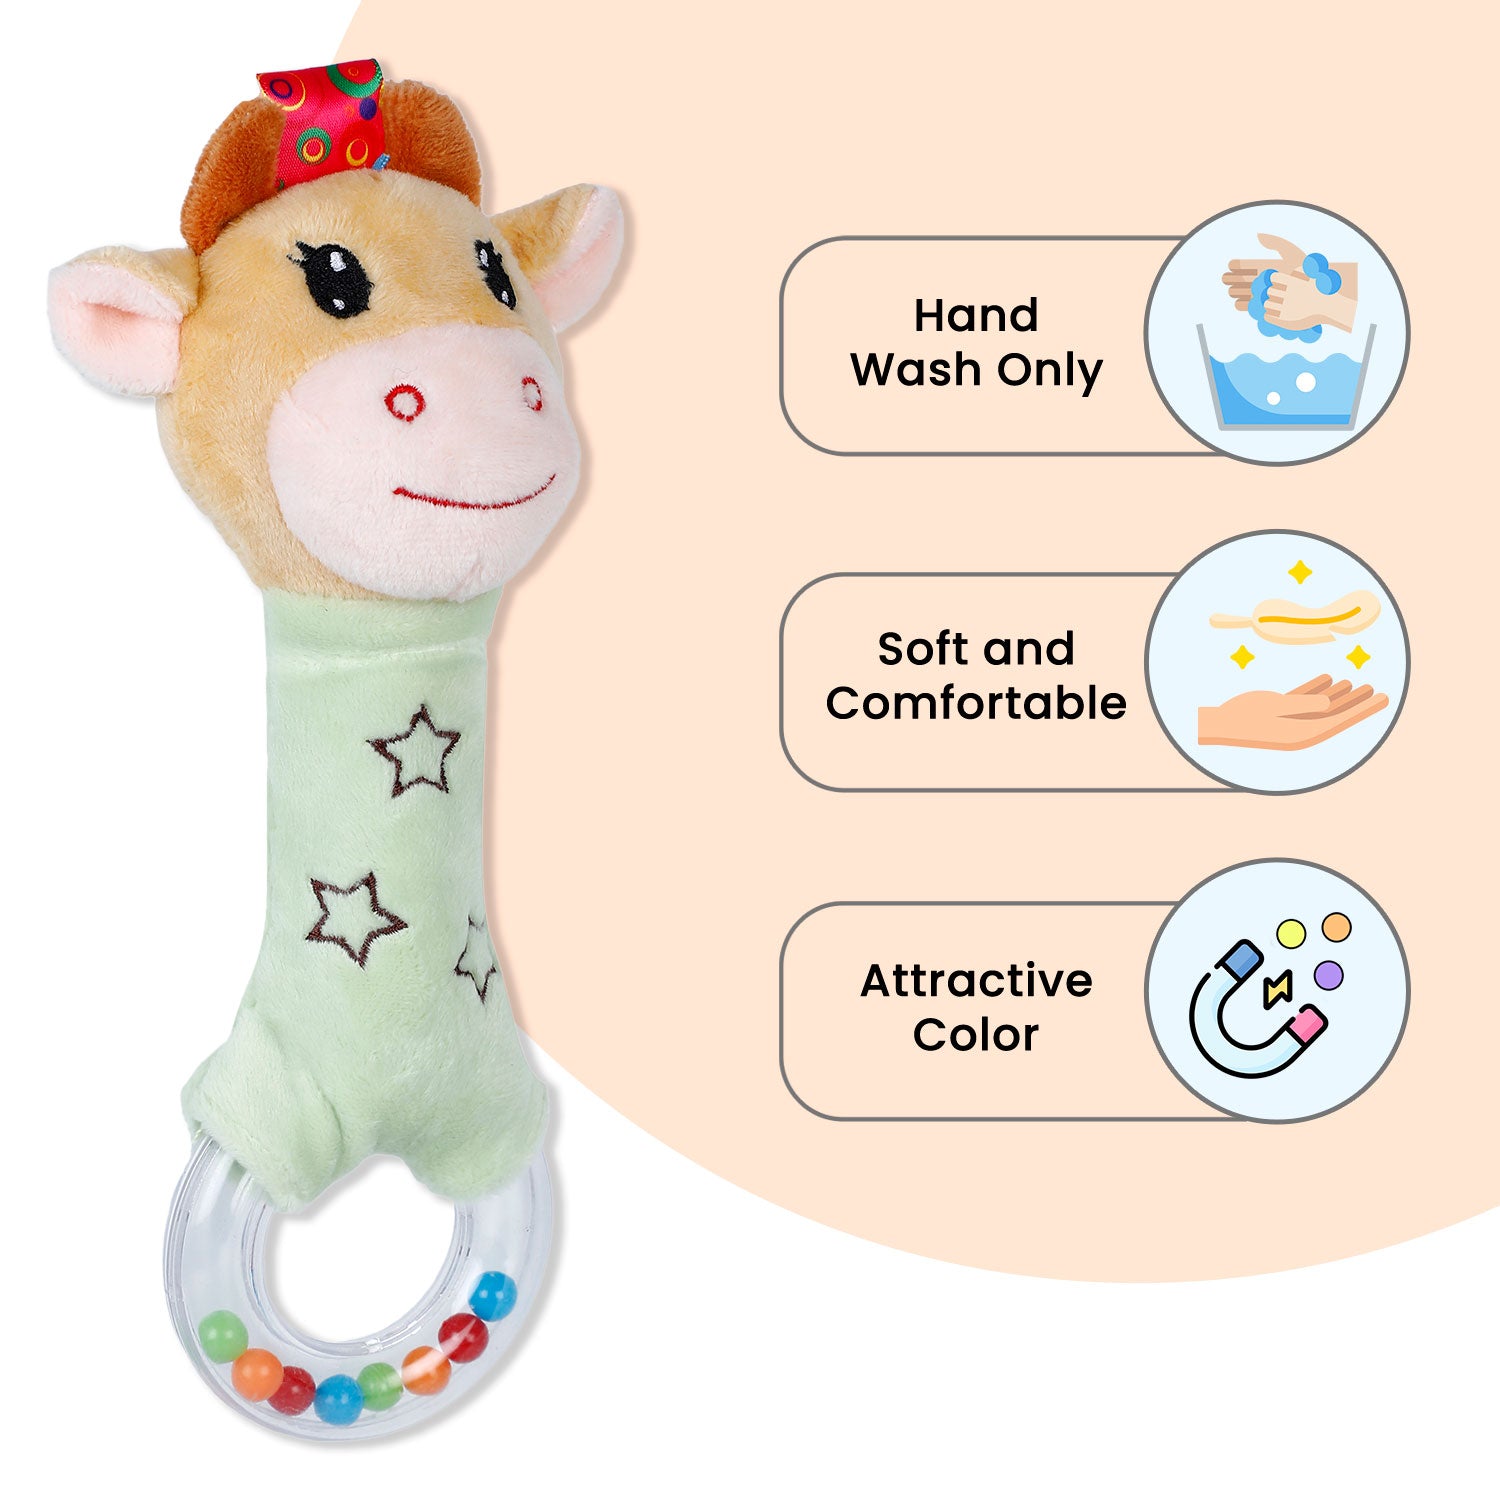 Baby Moo Cow Squeaker Sound Handheld Rattle Toy - Green